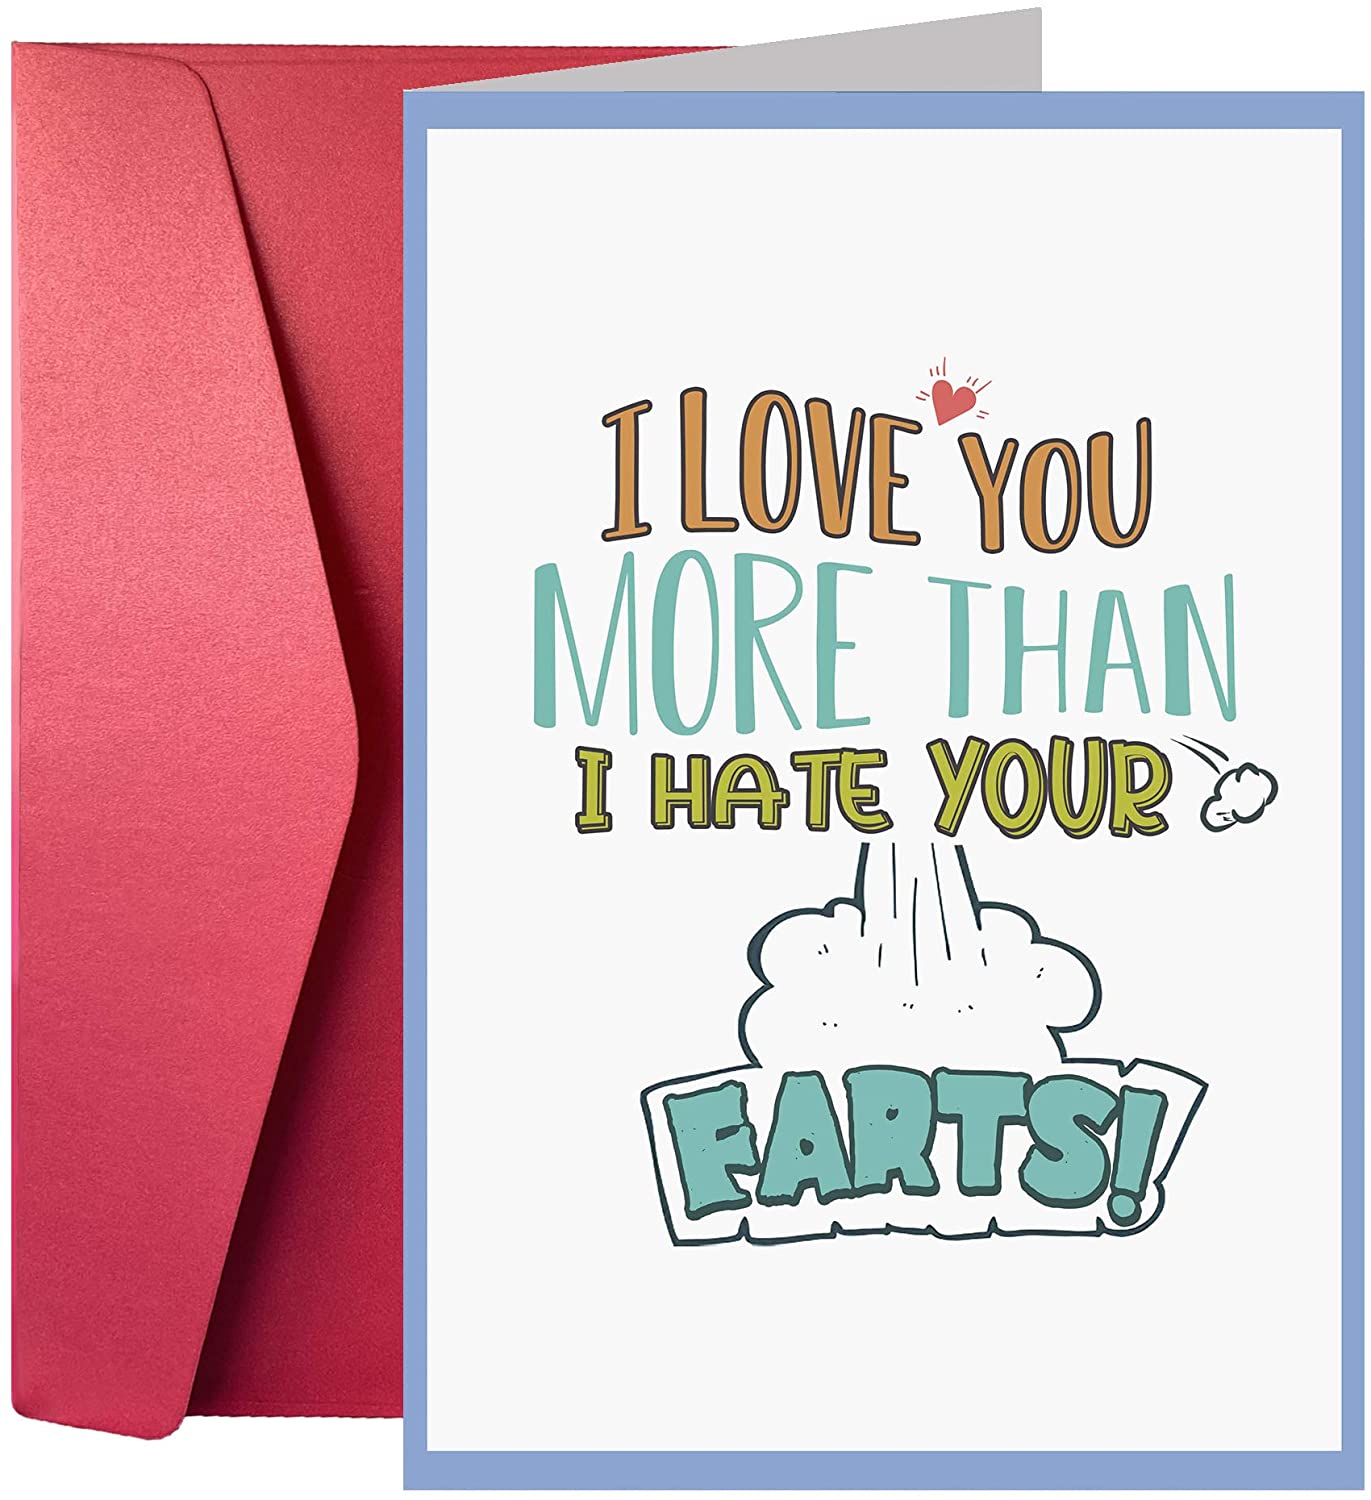 Funny I Love You Card, Valentine's Day Card for Husband Boyfriend, I Love You More Than I Hate Your Farts